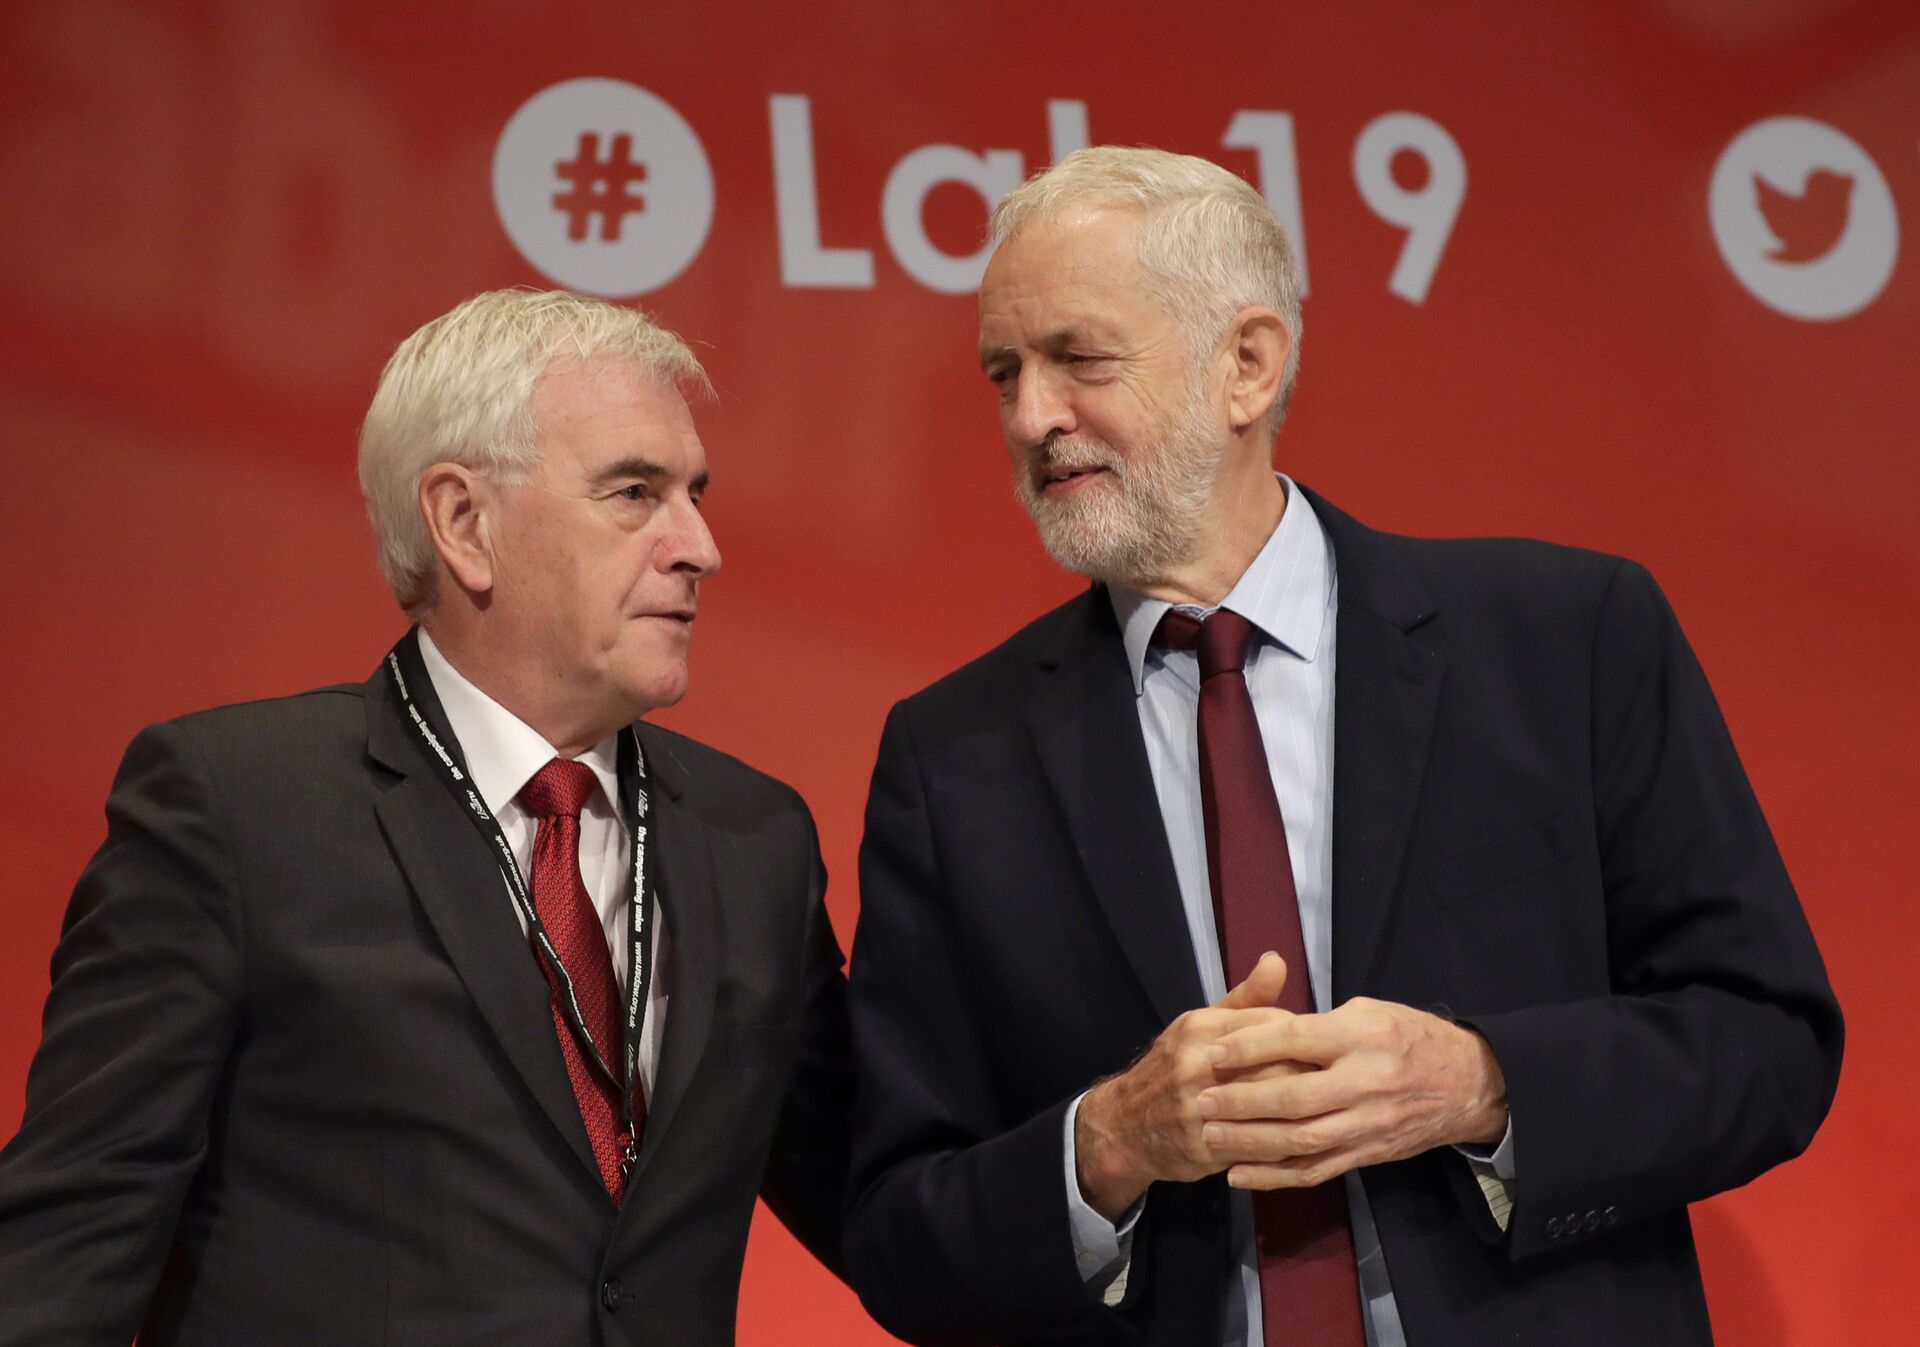 Jeremy Corbyn, leader of Britain's opposition Labour Party, right, and John McDonnell Shadow Chancellor on stage during the Labour Party Conference at the Brighton Centre , Tuesday, Sept. 24, 2019. - Sputnik International, 1920, 07.09.2021